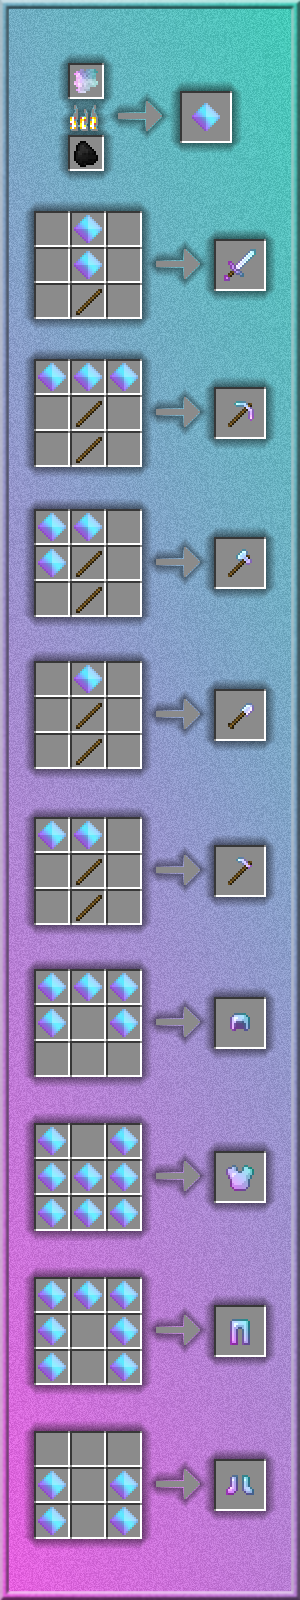 Crafts Items.png